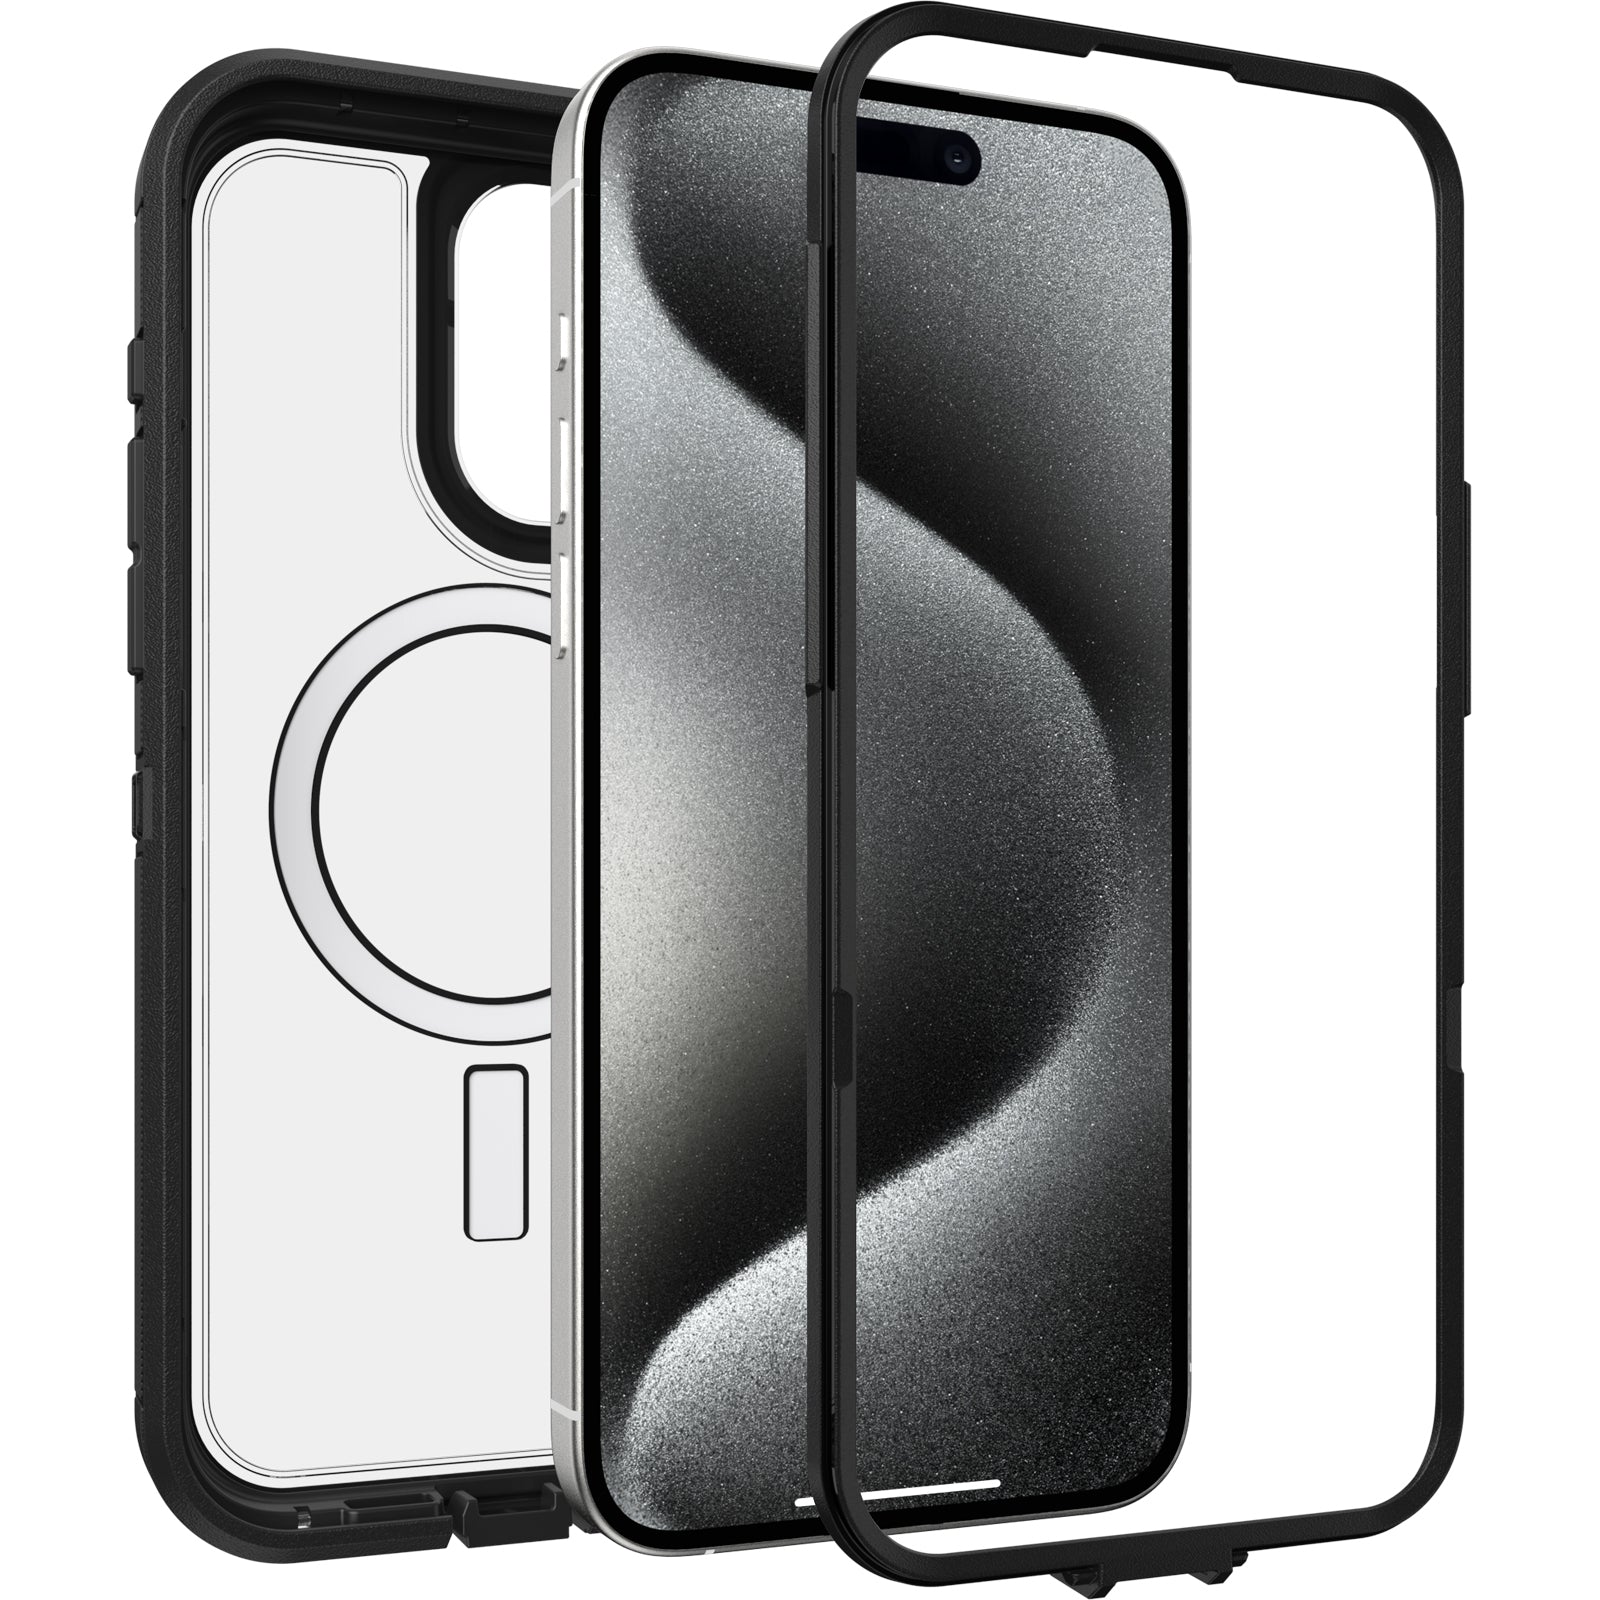  OtterBox Defender Case for iPhone 15 Plus/iPhone 14 Plus,  Shockproof, Drop Proof, Ultra-Rugged, Protective Case, 5X Tested to  Military Standard, Black : Cell Phones & Accessories